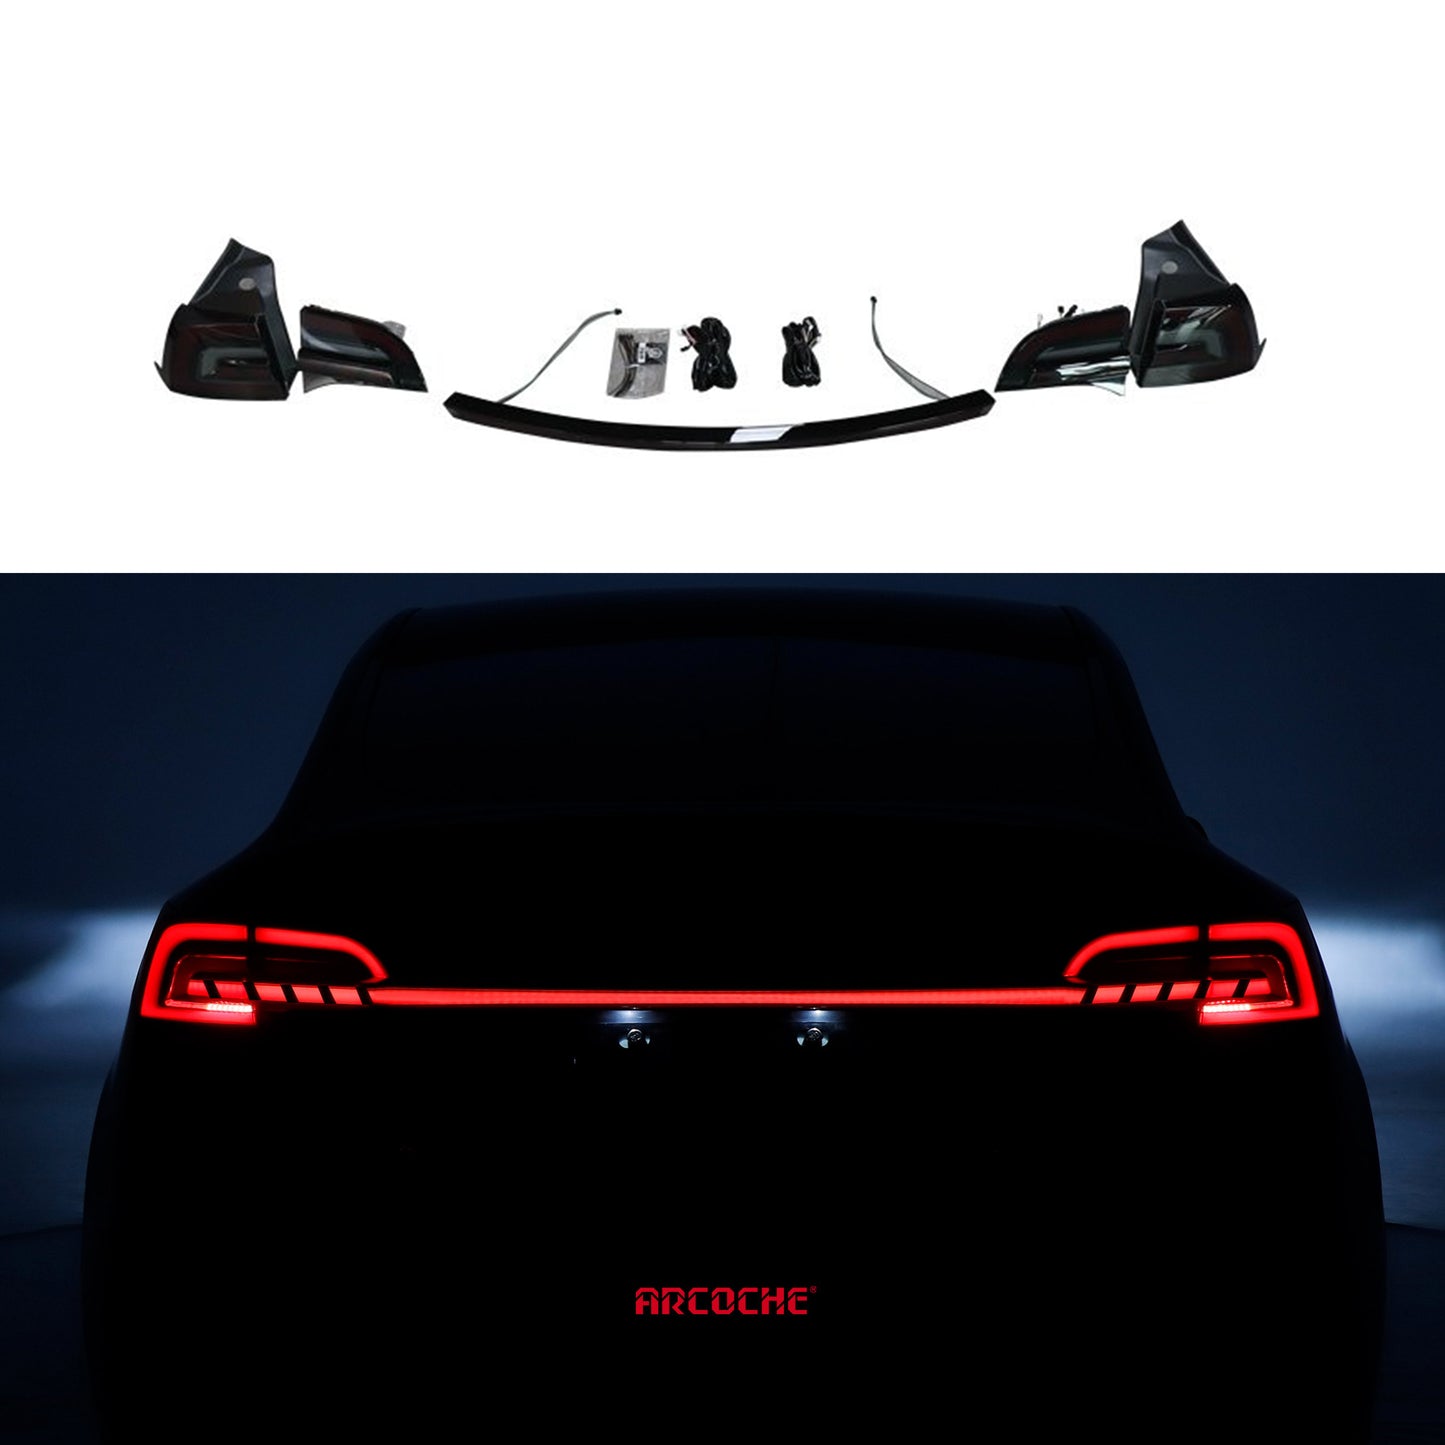 tesla model 3 Y car 2022 2023 2021 2020 2019 2018 s3xy  Through Tail Dynamic Lamp Set arcoche accessories accessory aftermarket price Vehicles standard long range performance sr+ electric car rwd ev interior exterior diy decoration price elon musk must have black white red blue 5 7 seats seat